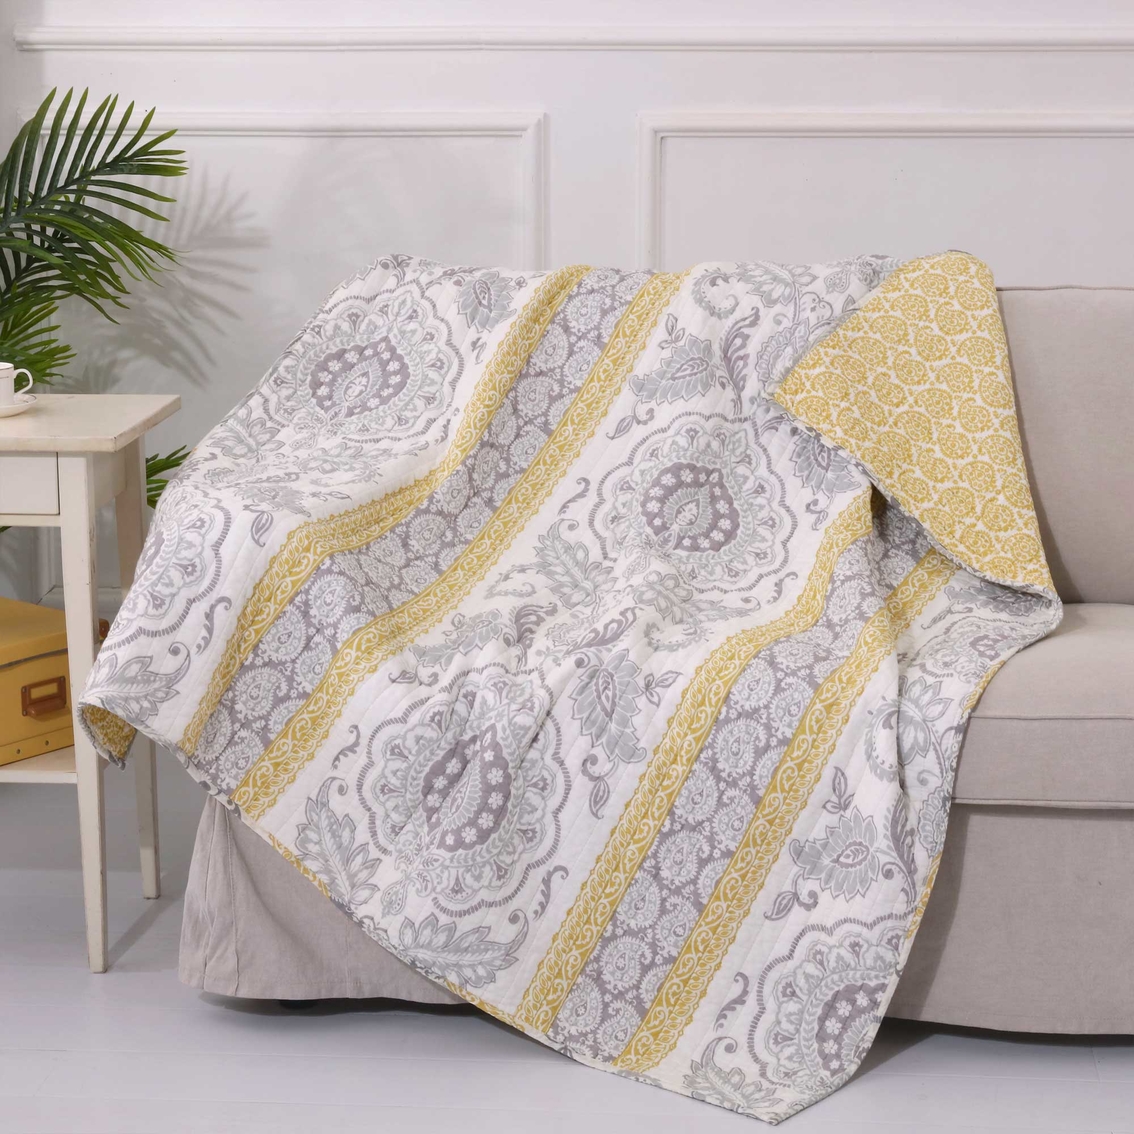 Levtex Home St. Claire Quilted Throw - Image 2 of 3